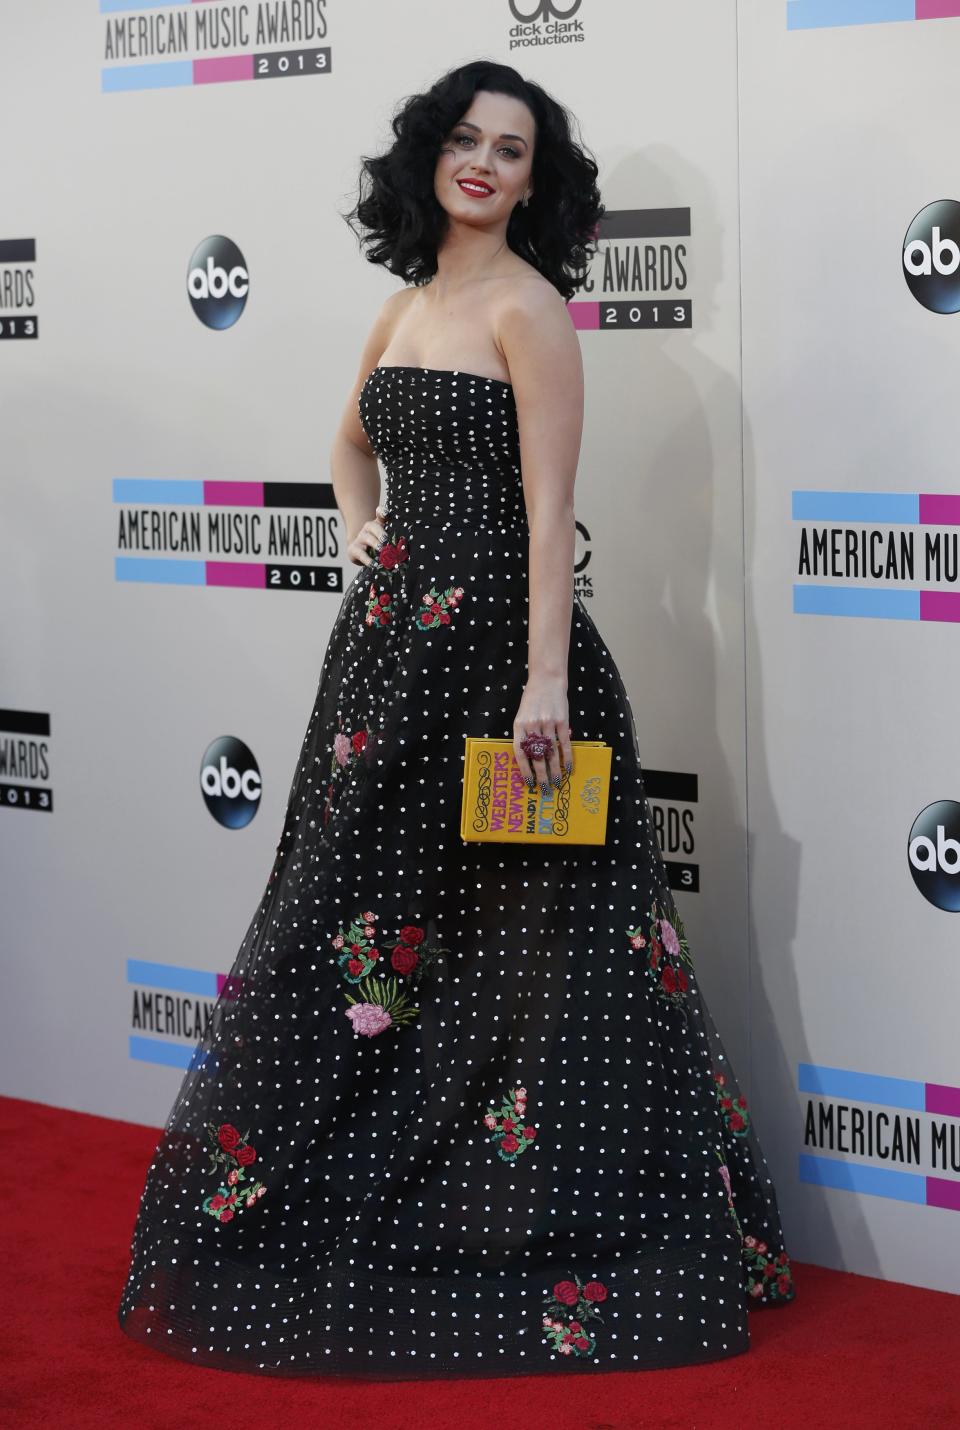 Singer Katy Perry arrives at the 41st American Music Awards in Los Angeles